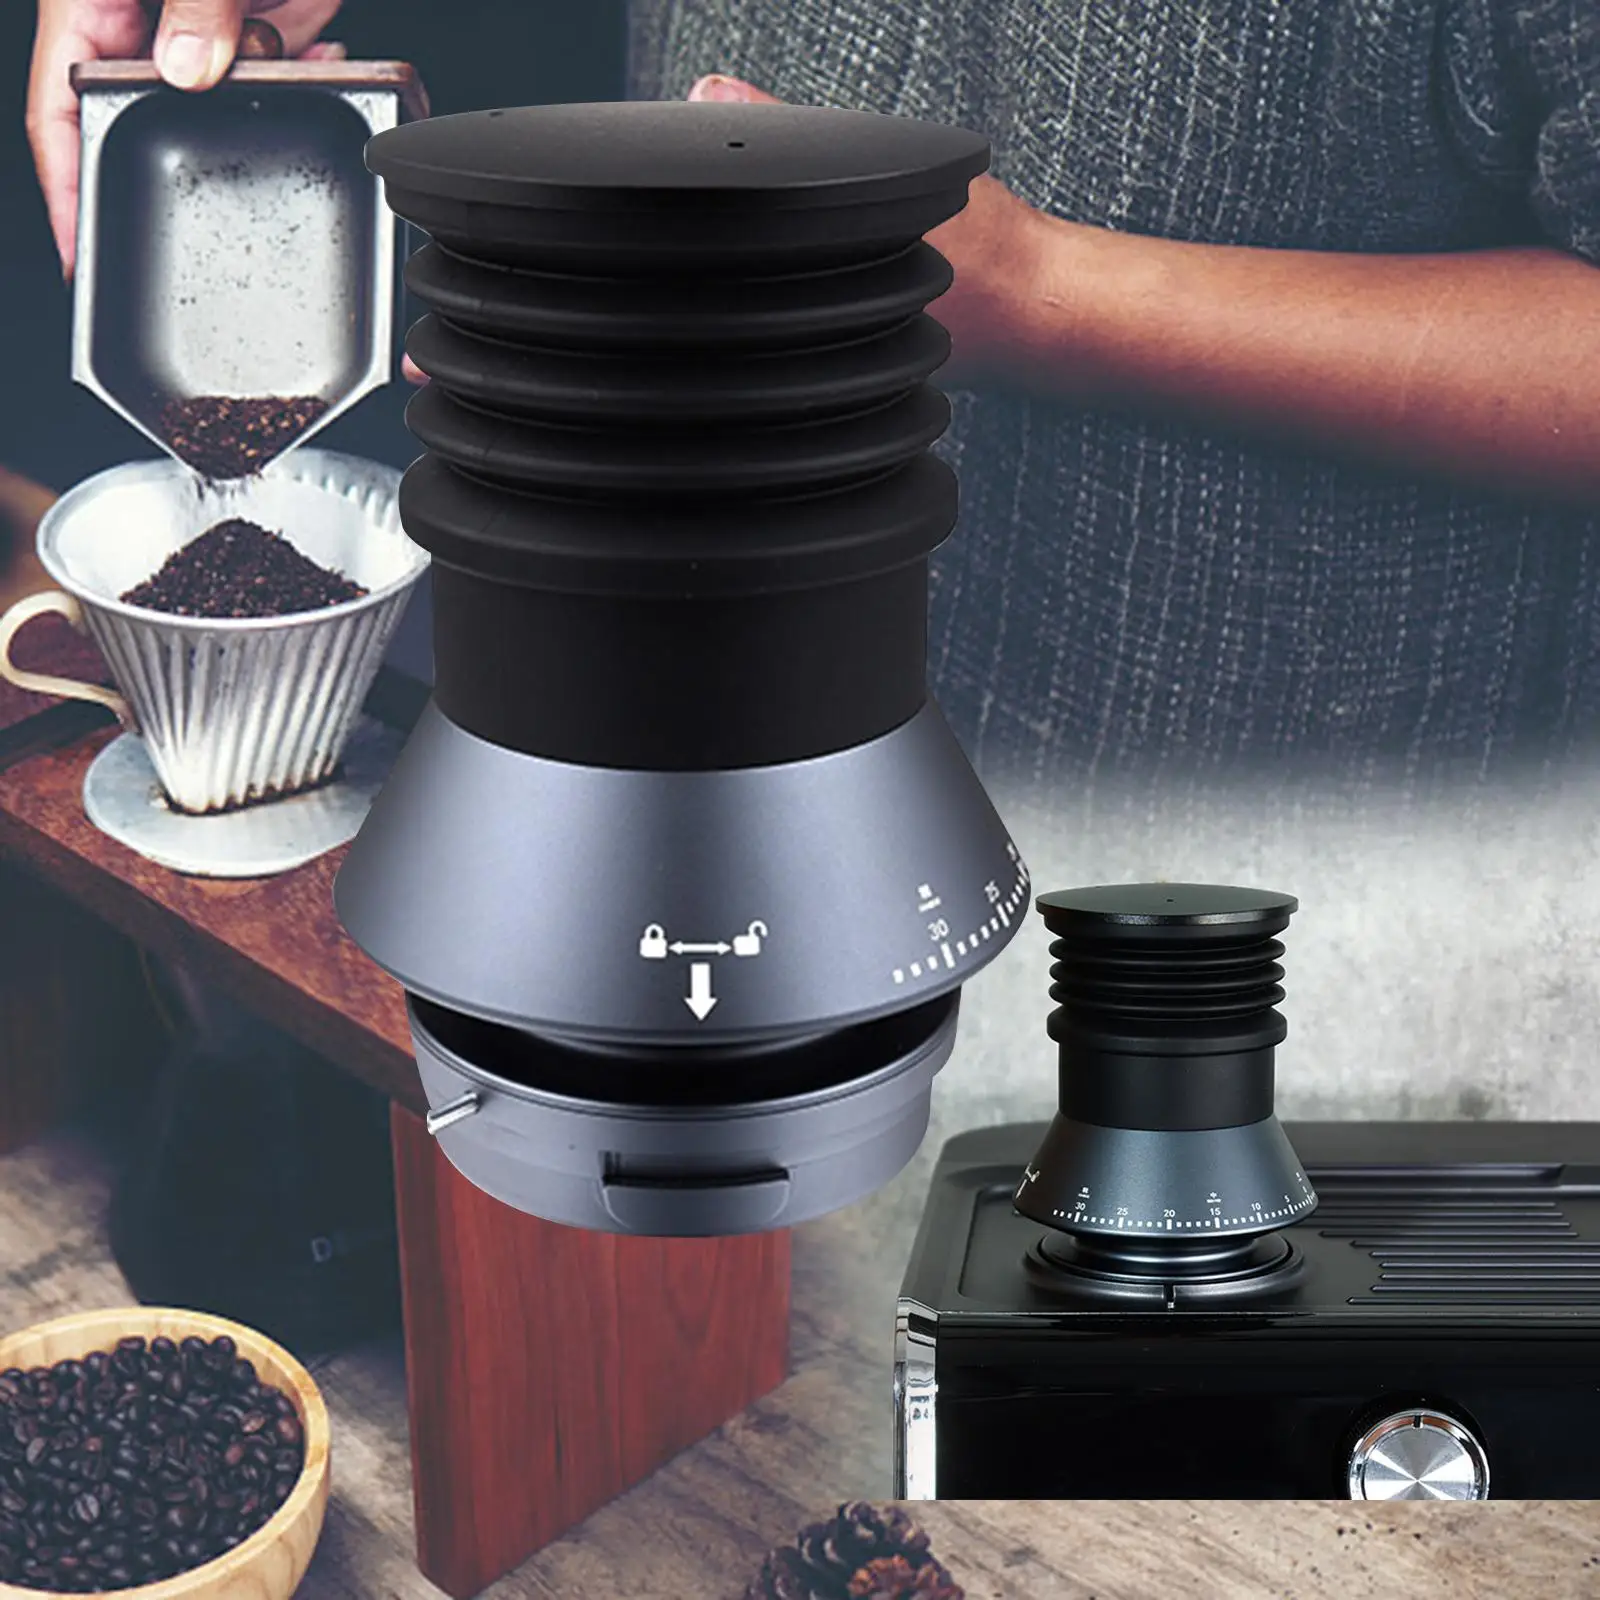 Household Coffee Grinder Blowing Bean Bin Reusable Aluminium Alloy Cleaning Tool Accessories for Restaurant Kitchen Supplies